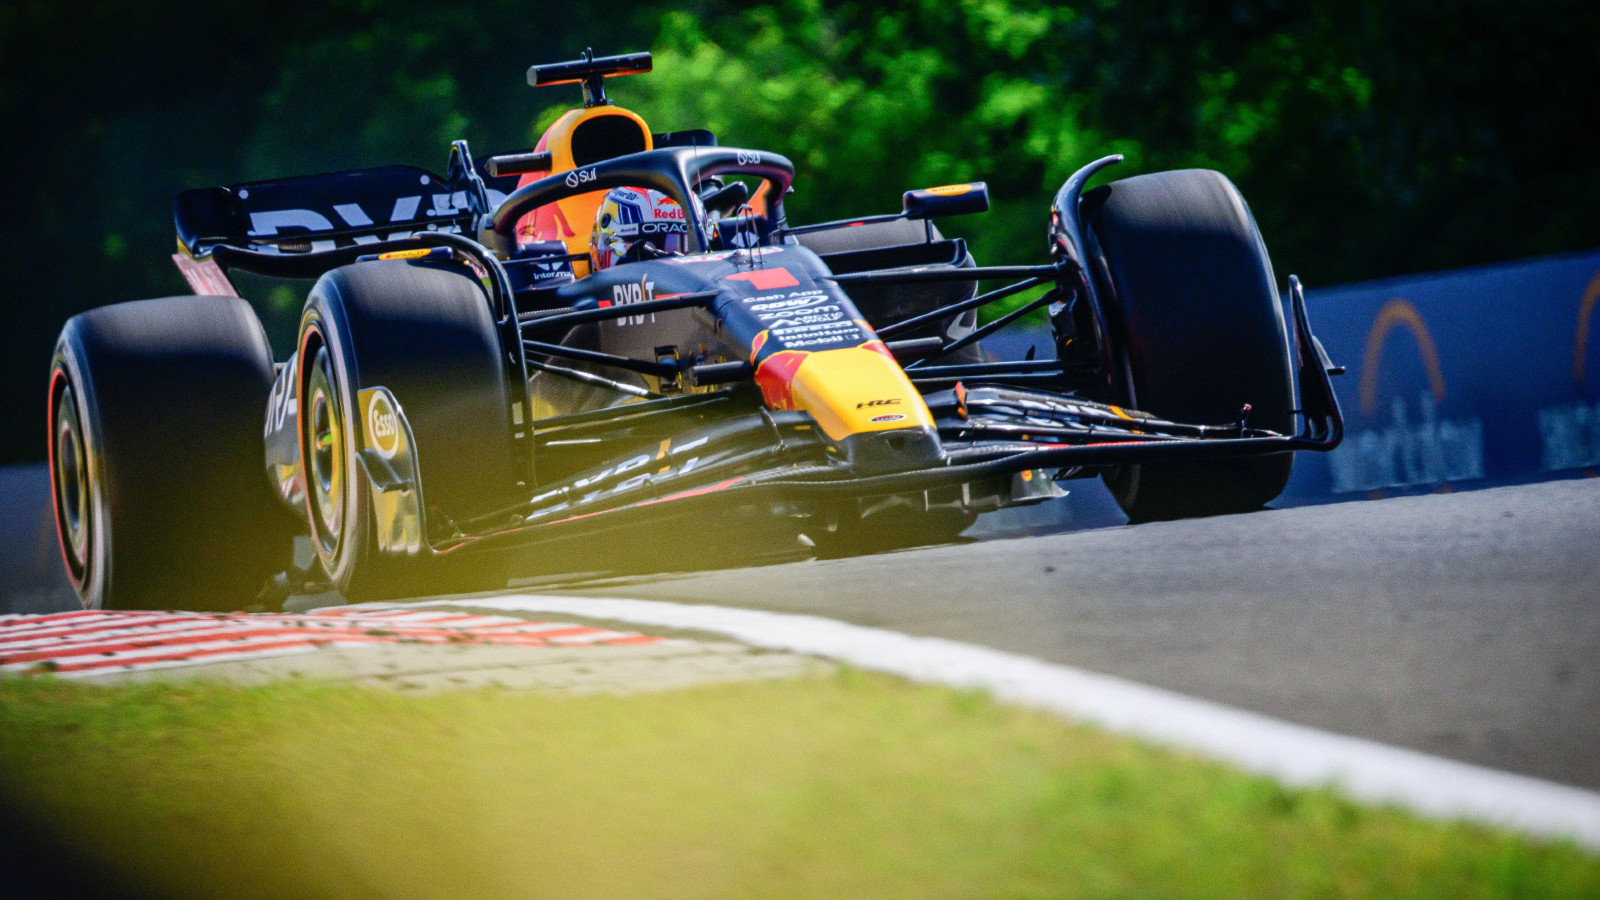 F1 News: Will Max Verstappen lose 2021 F1 Championship title after Red  Bull's budget cap breach? Team advisor gives his take